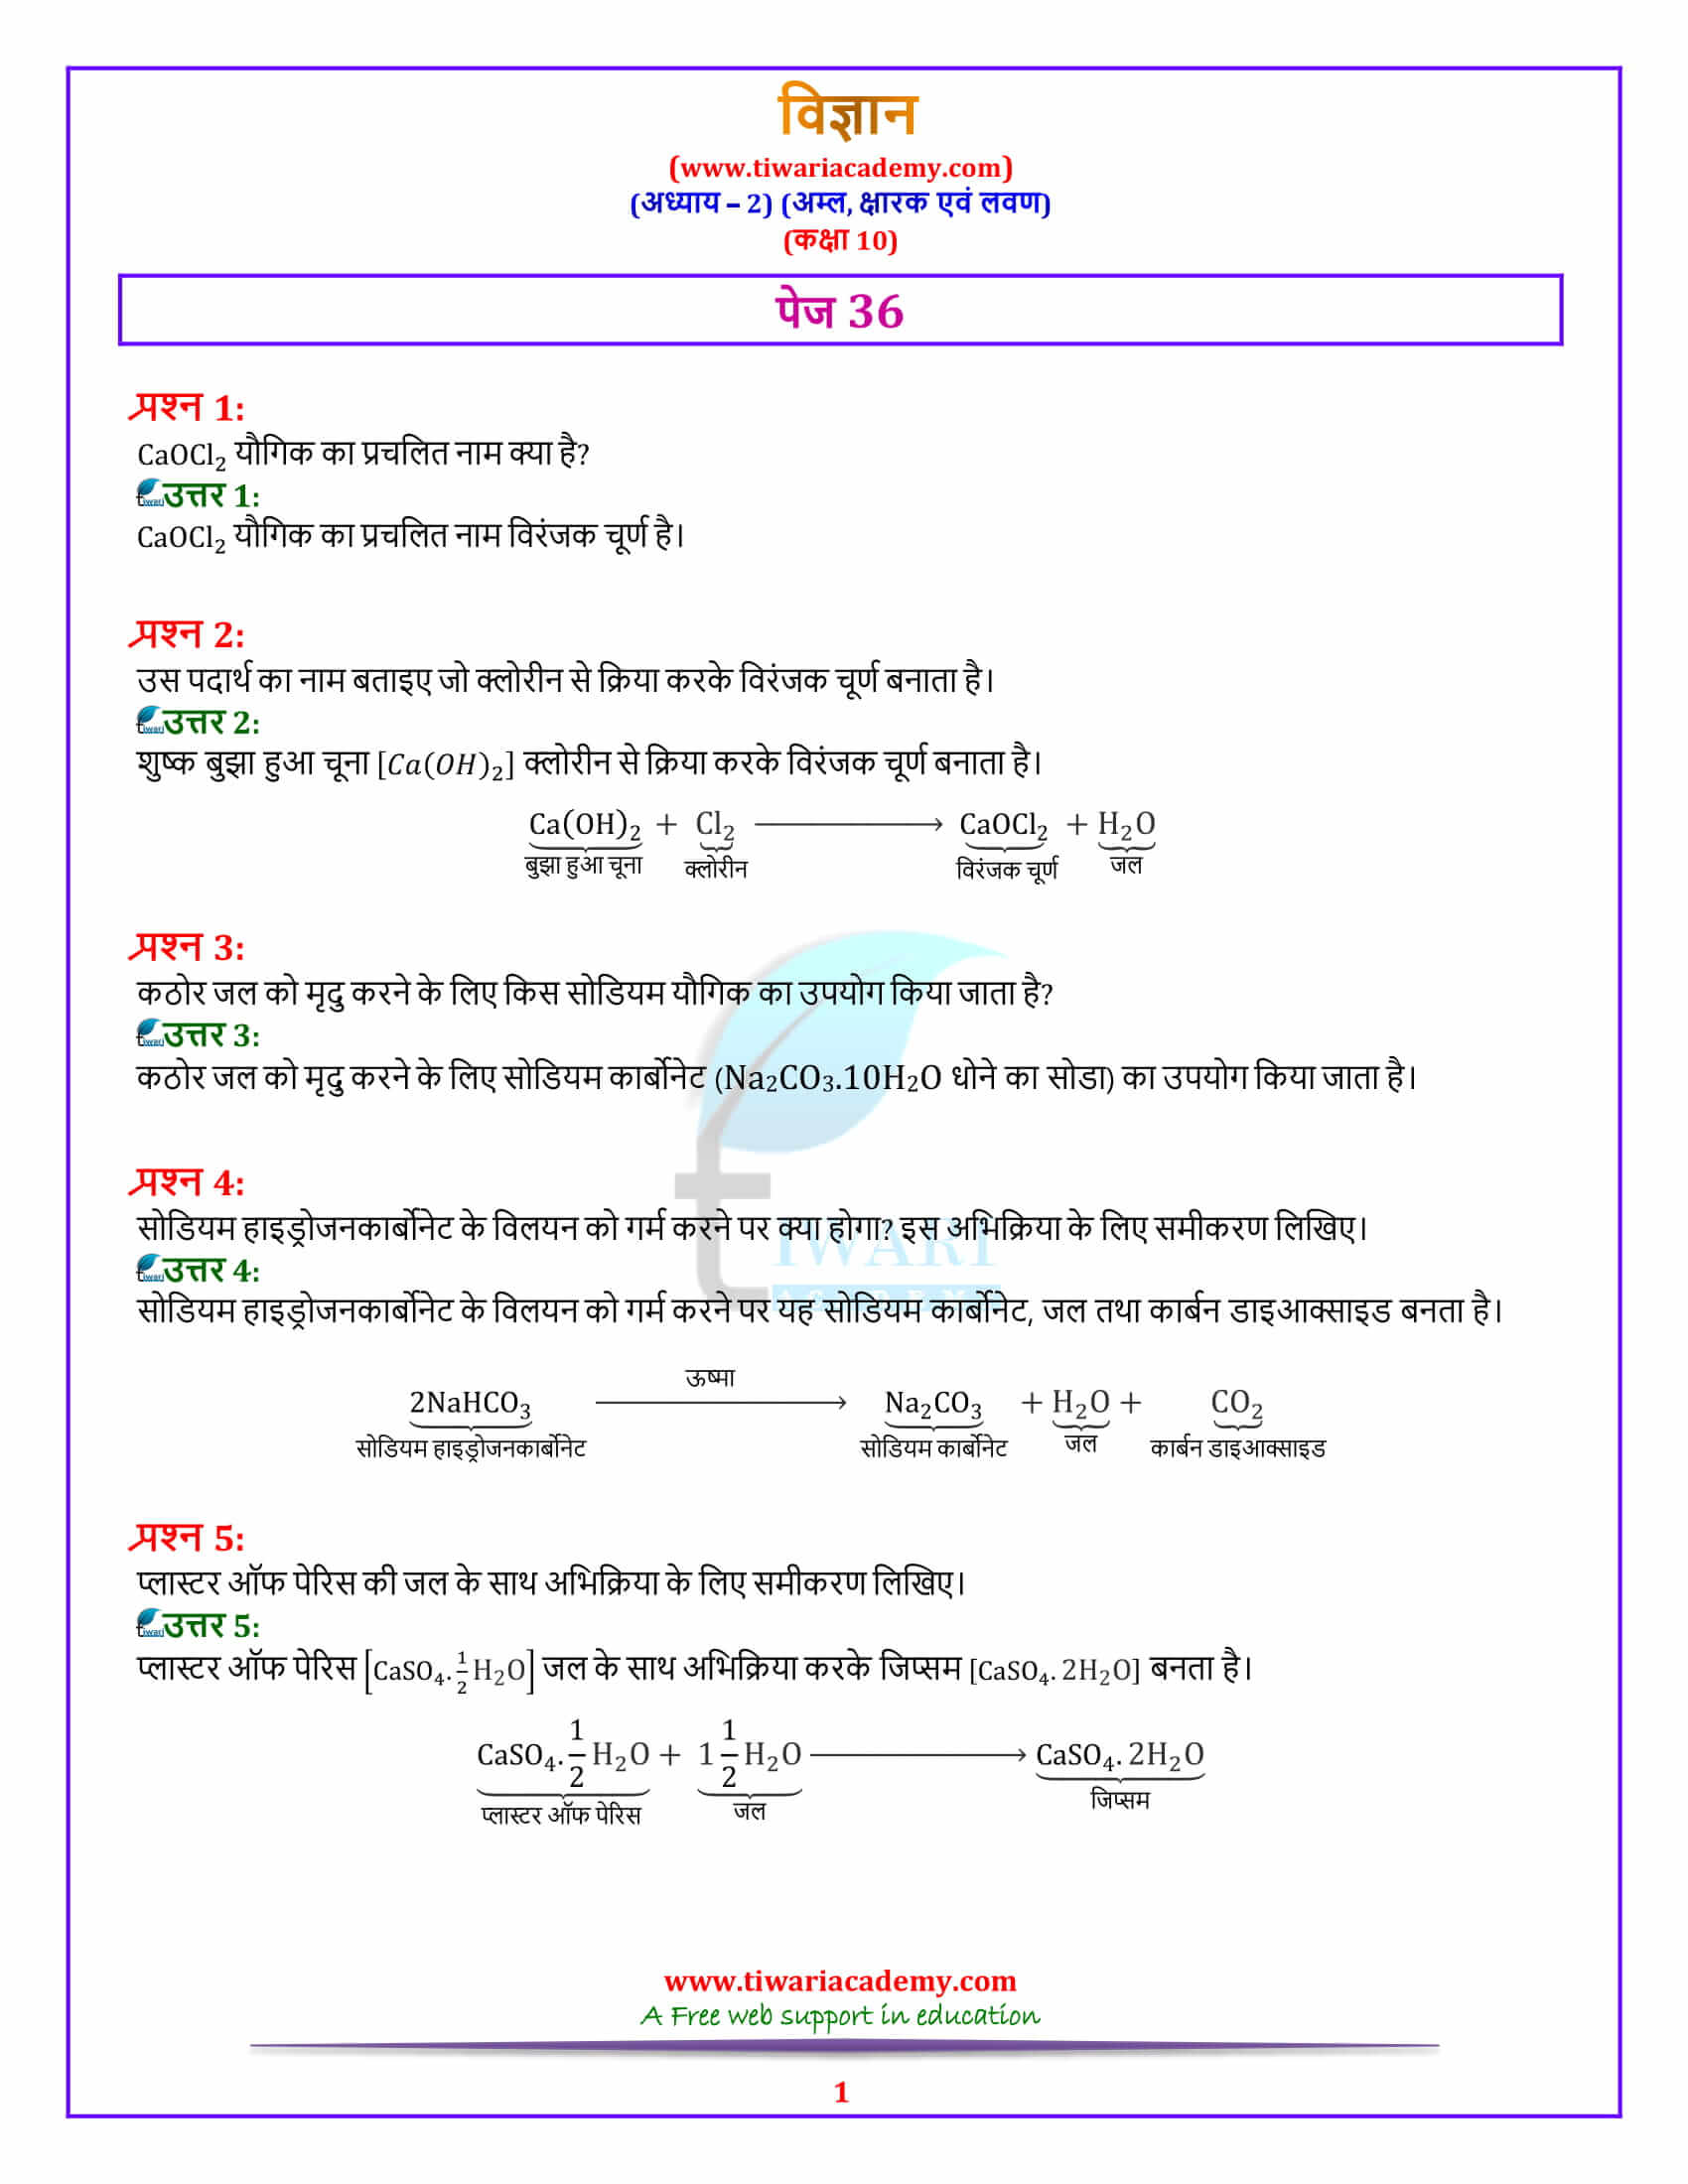 10 Science Chapter 2 Acids, Bases and Salts Intext questions पेज 36 के उत्तर